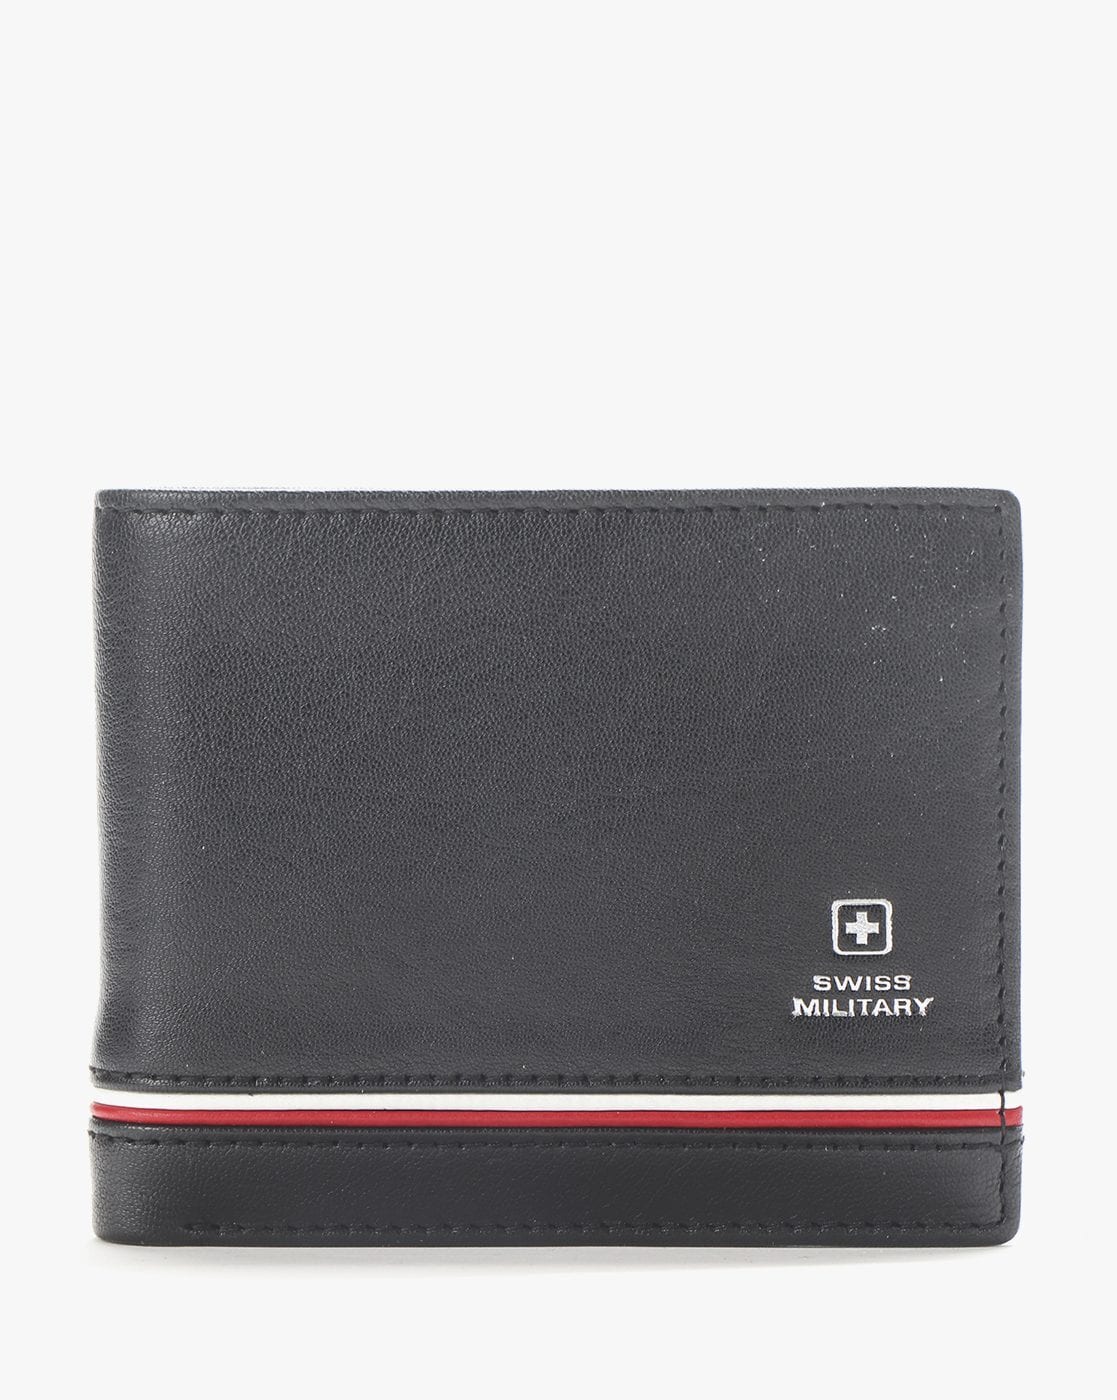 Swiss Military Black Synthetic Mens Wallet (PW4) - QualiCorp Gifts Services